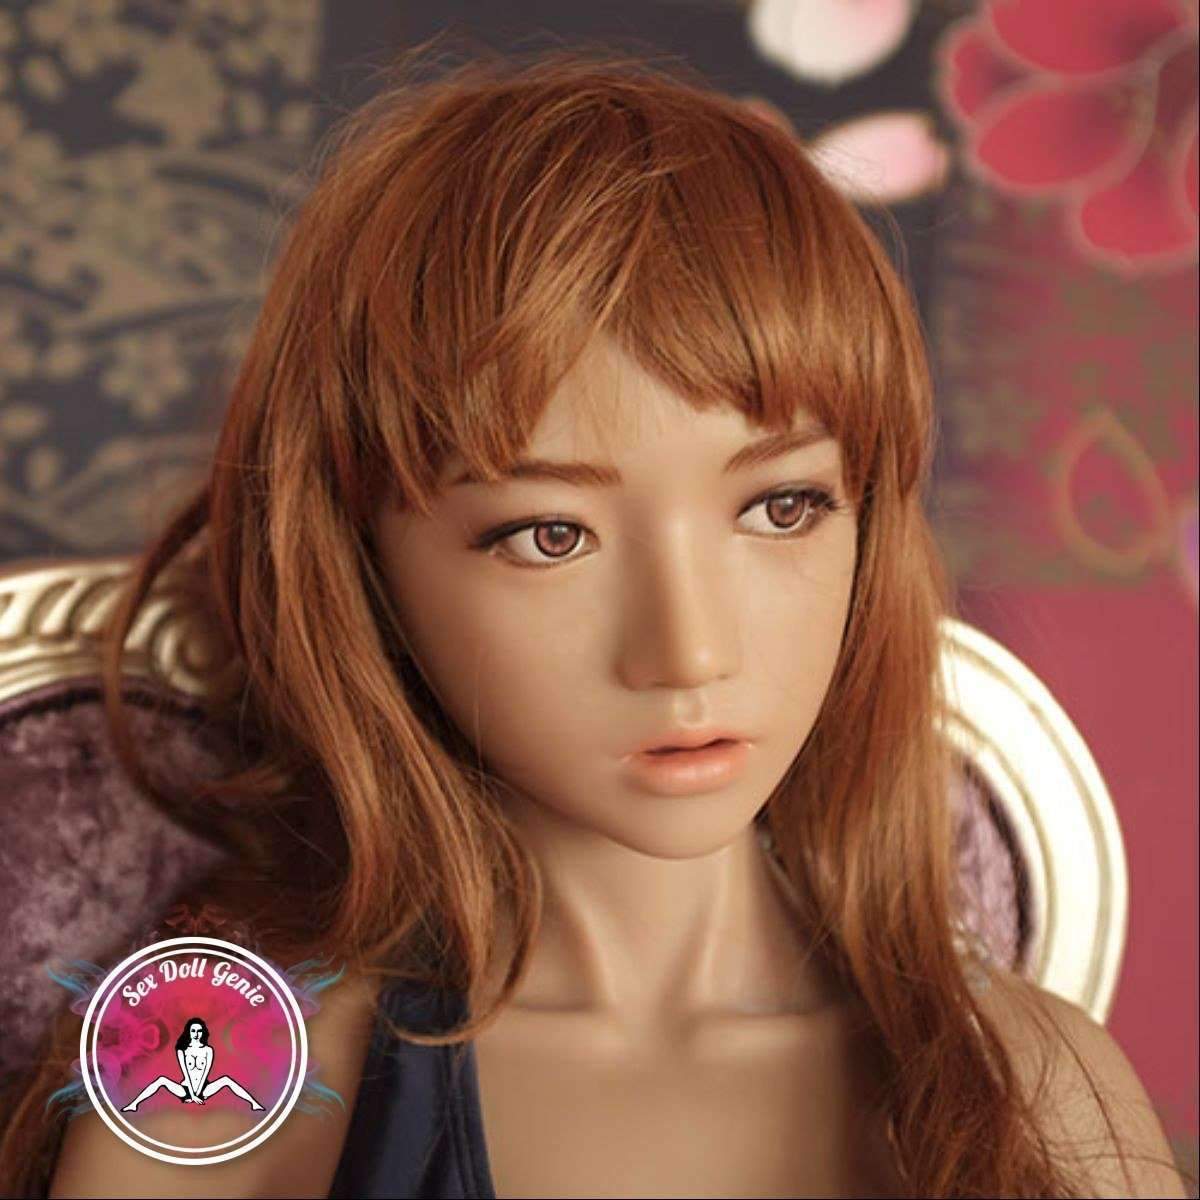 DS Doll - 163Plus - Samantha (Elf) Head - Type 1 D Cup Silicone Doll-17